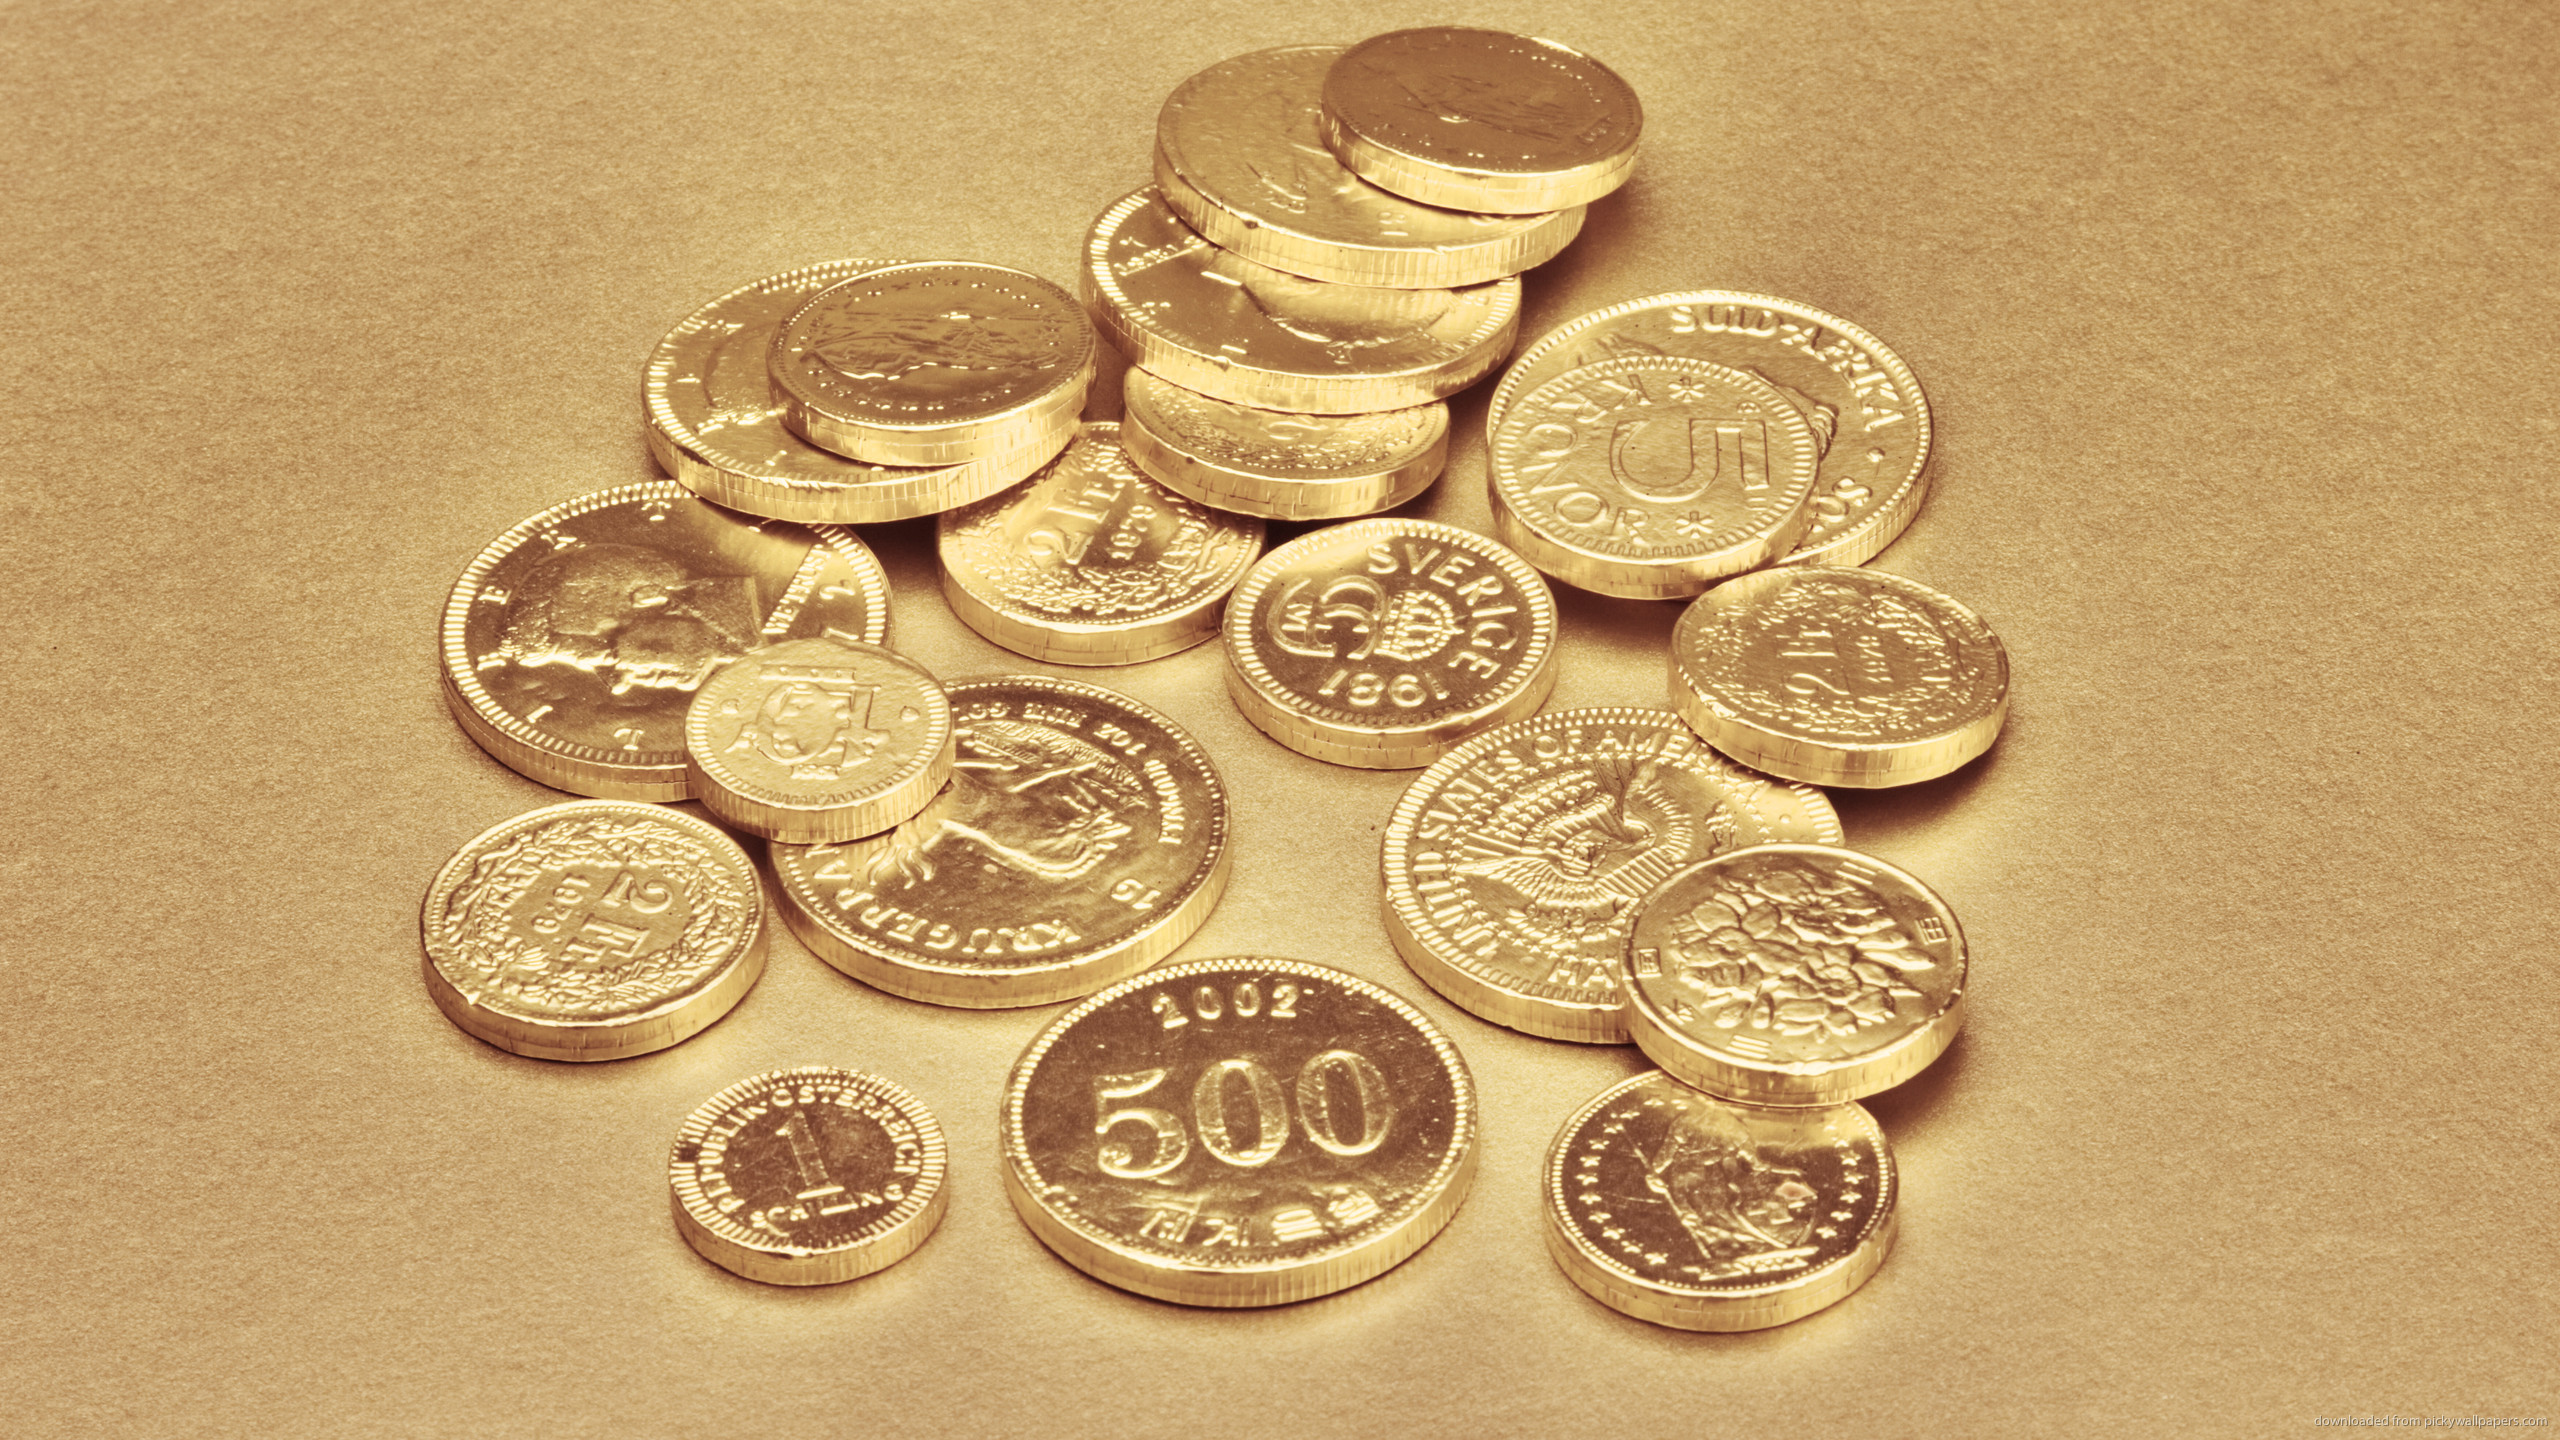 2560x1440 Coins tinted gold for 